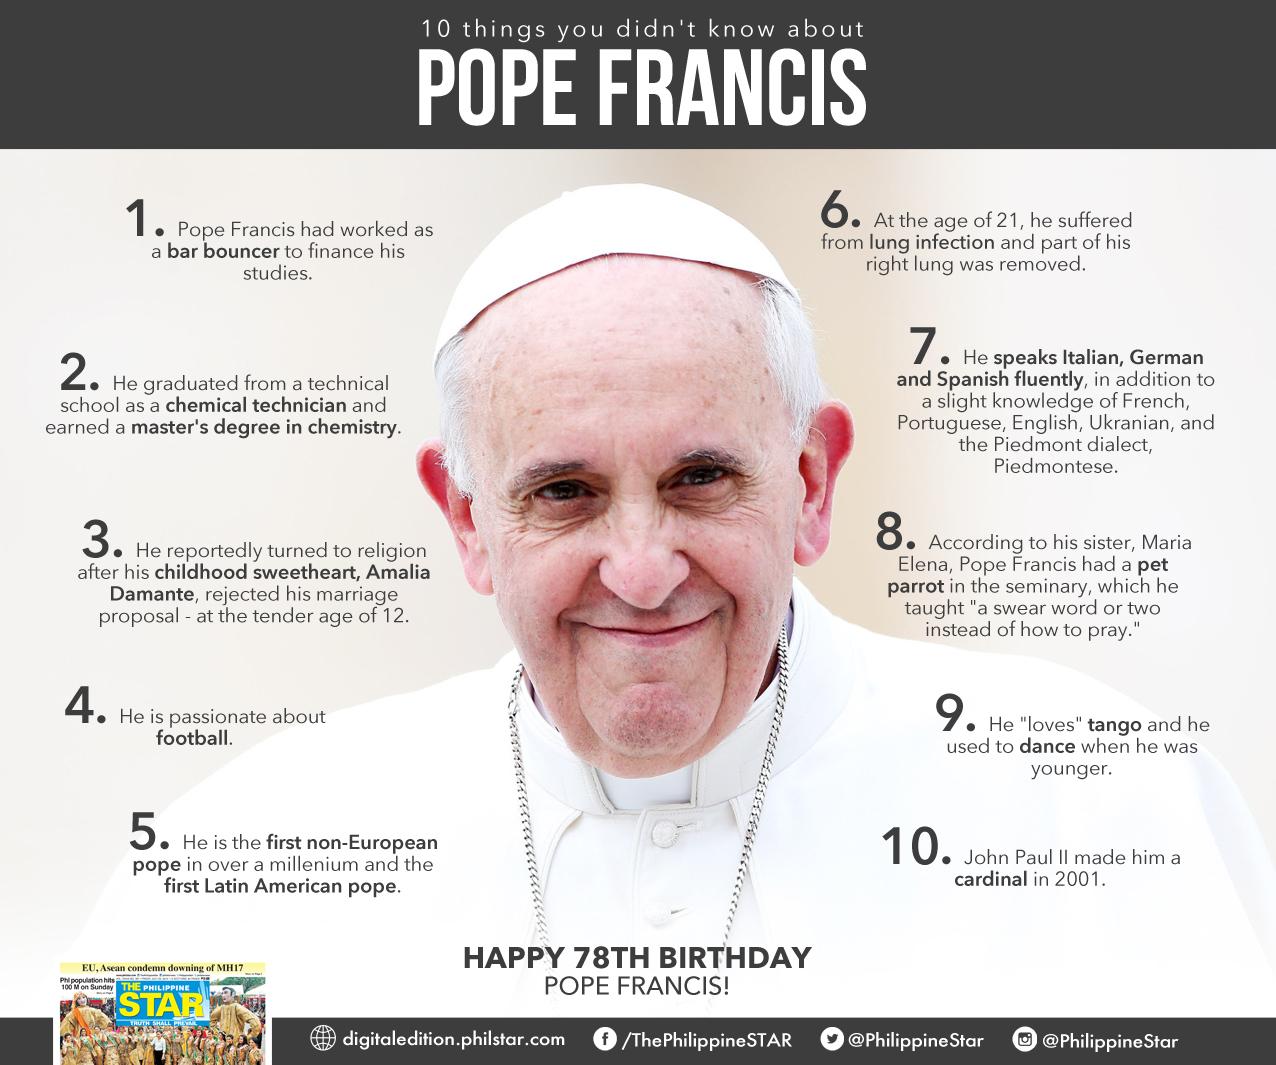 The beloved turns 78 today! Happy birthday, Pope Francis! 